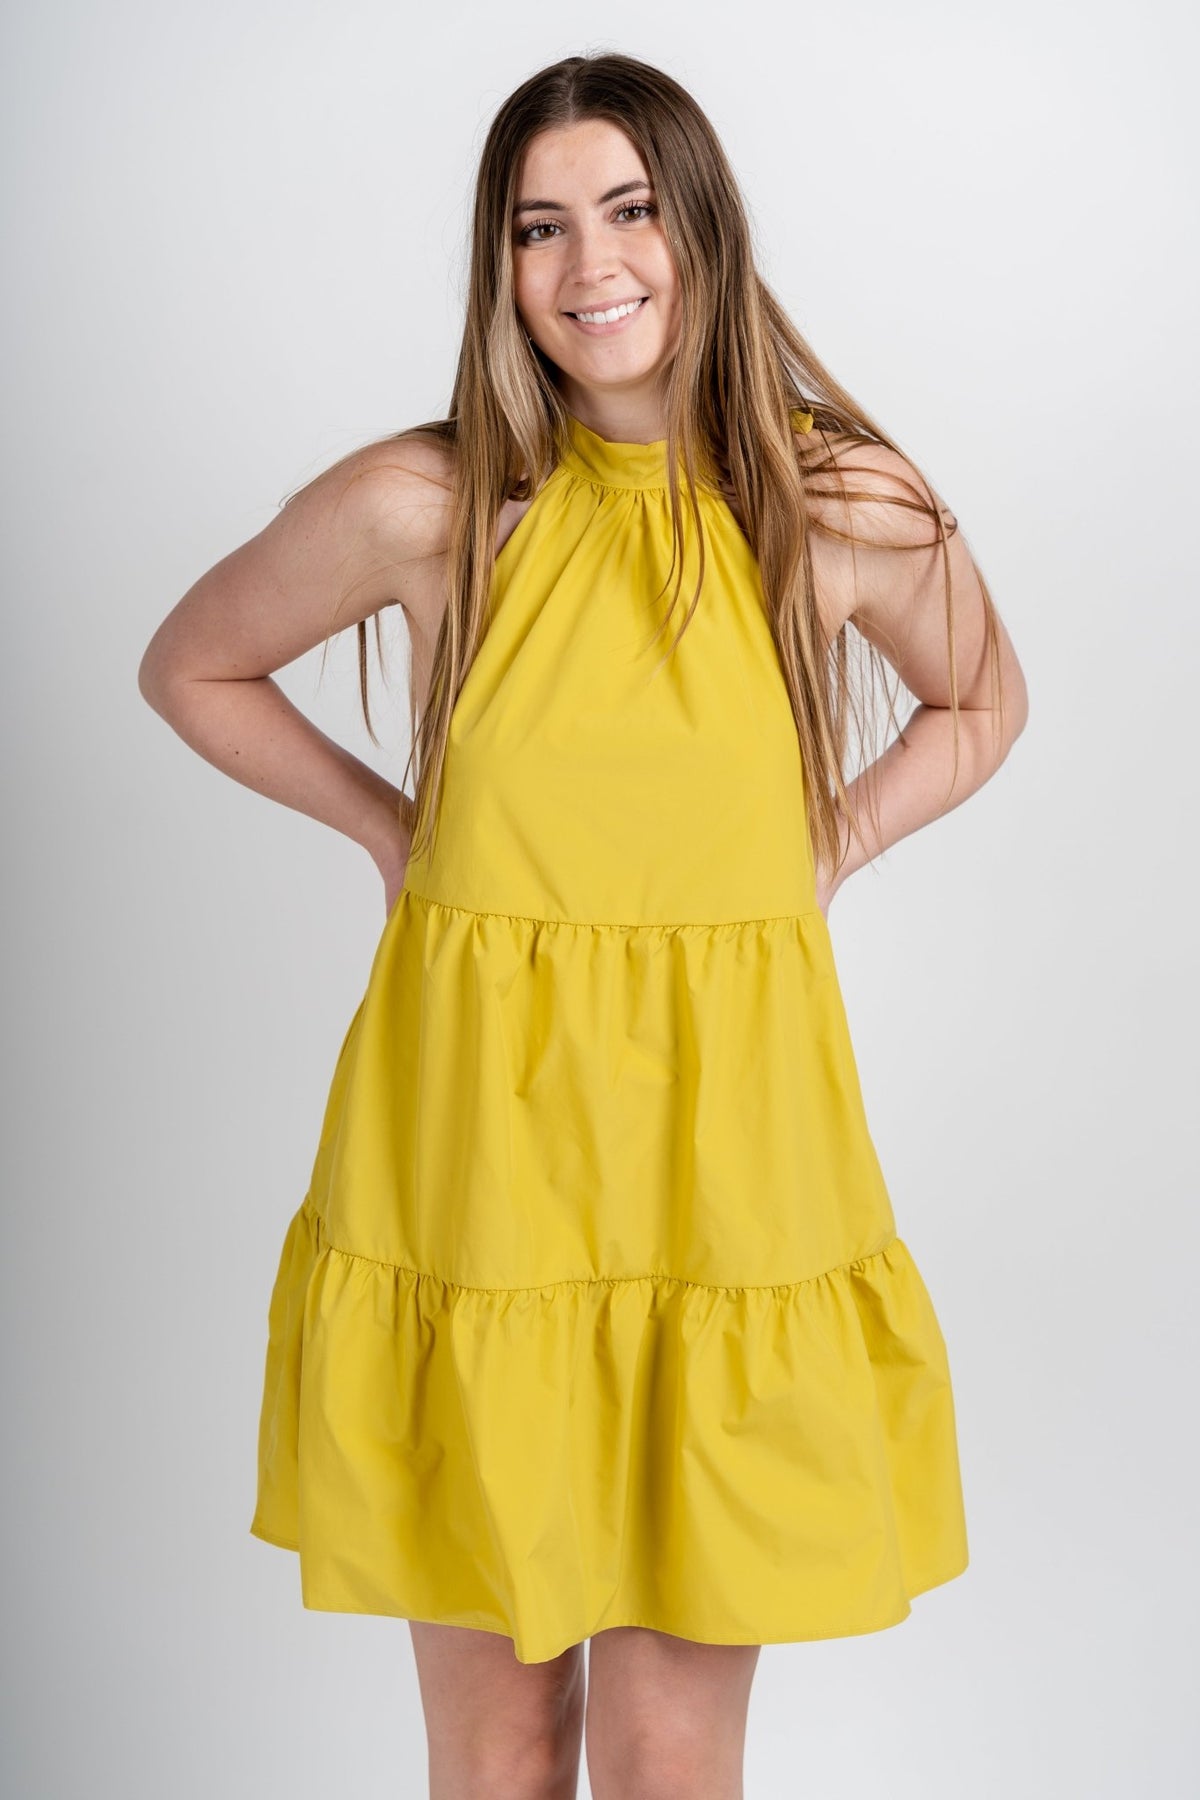 Halter neck tiered dress chartreuse - Cute Dress - Trendy Dresses at Lush Fashion Lounge Boutique in Oklahoma City